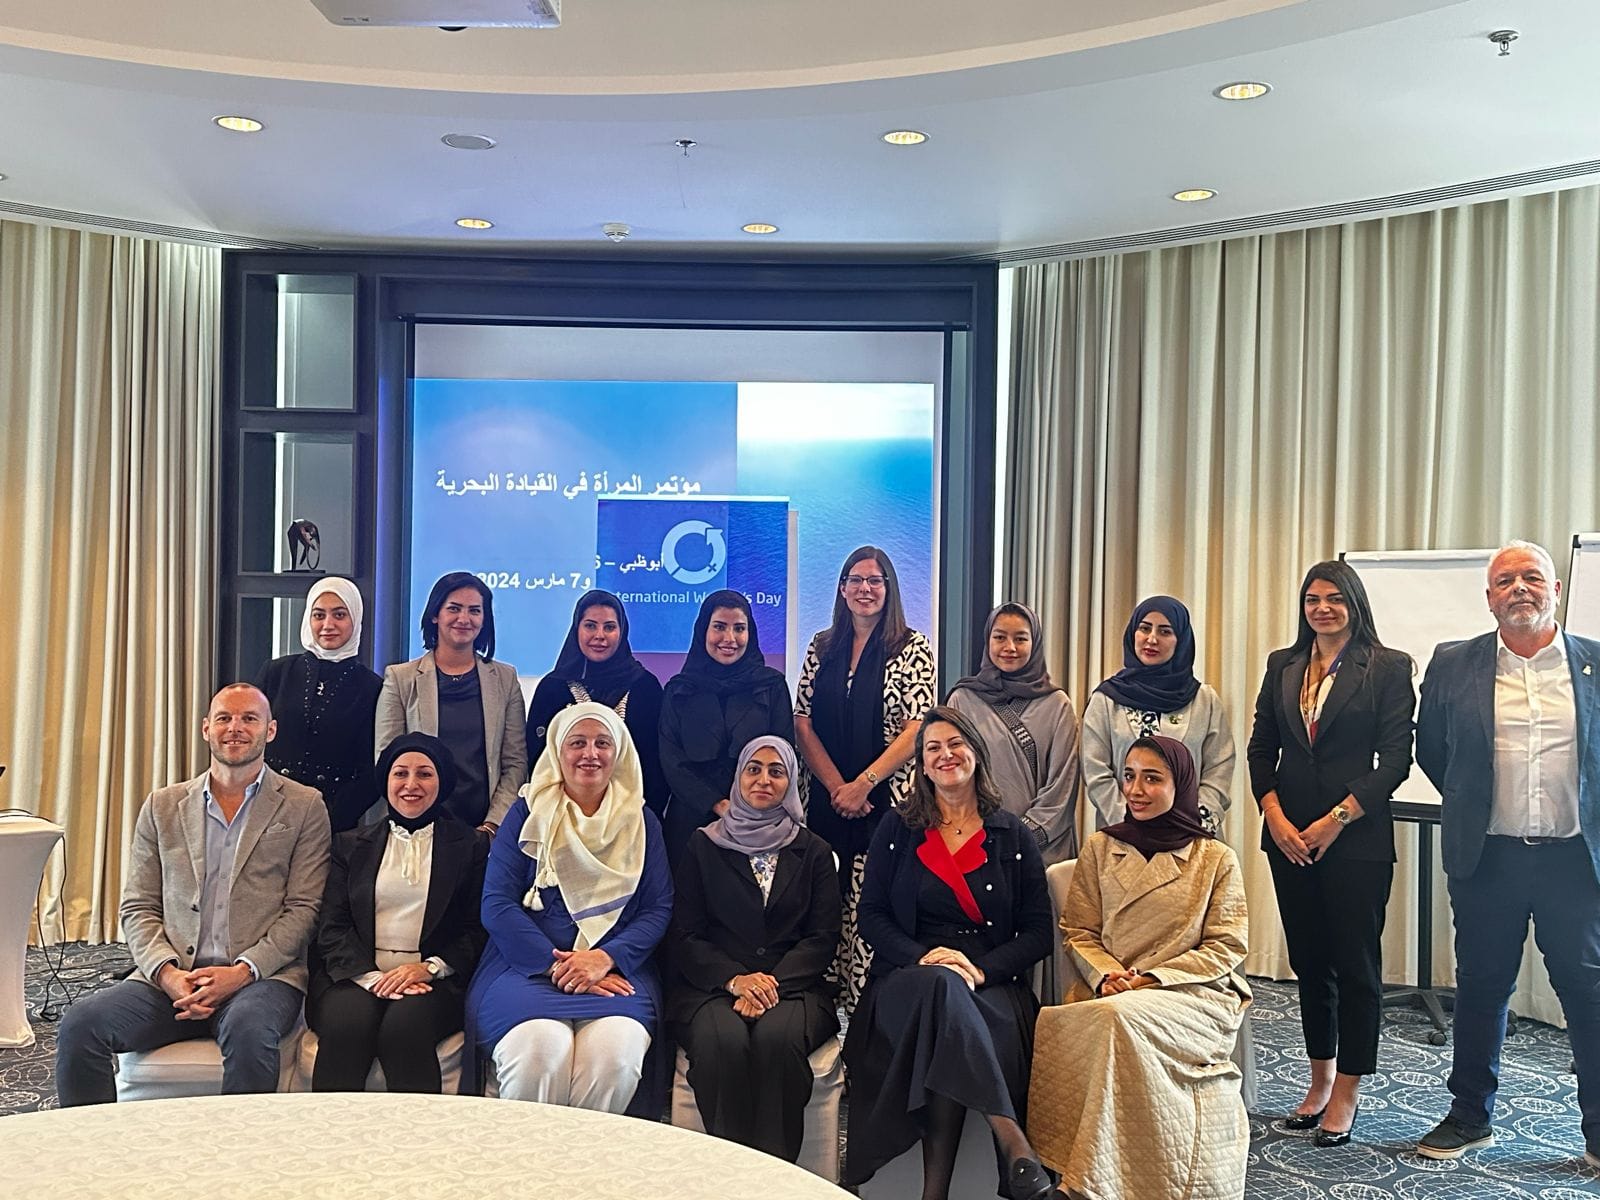 Part of the participation of the Jordanian national entity of the Arab Women’s Association in the Maritime Sector in the Women in Maritime Leadership Conference, which was held in the United Arab Emirates